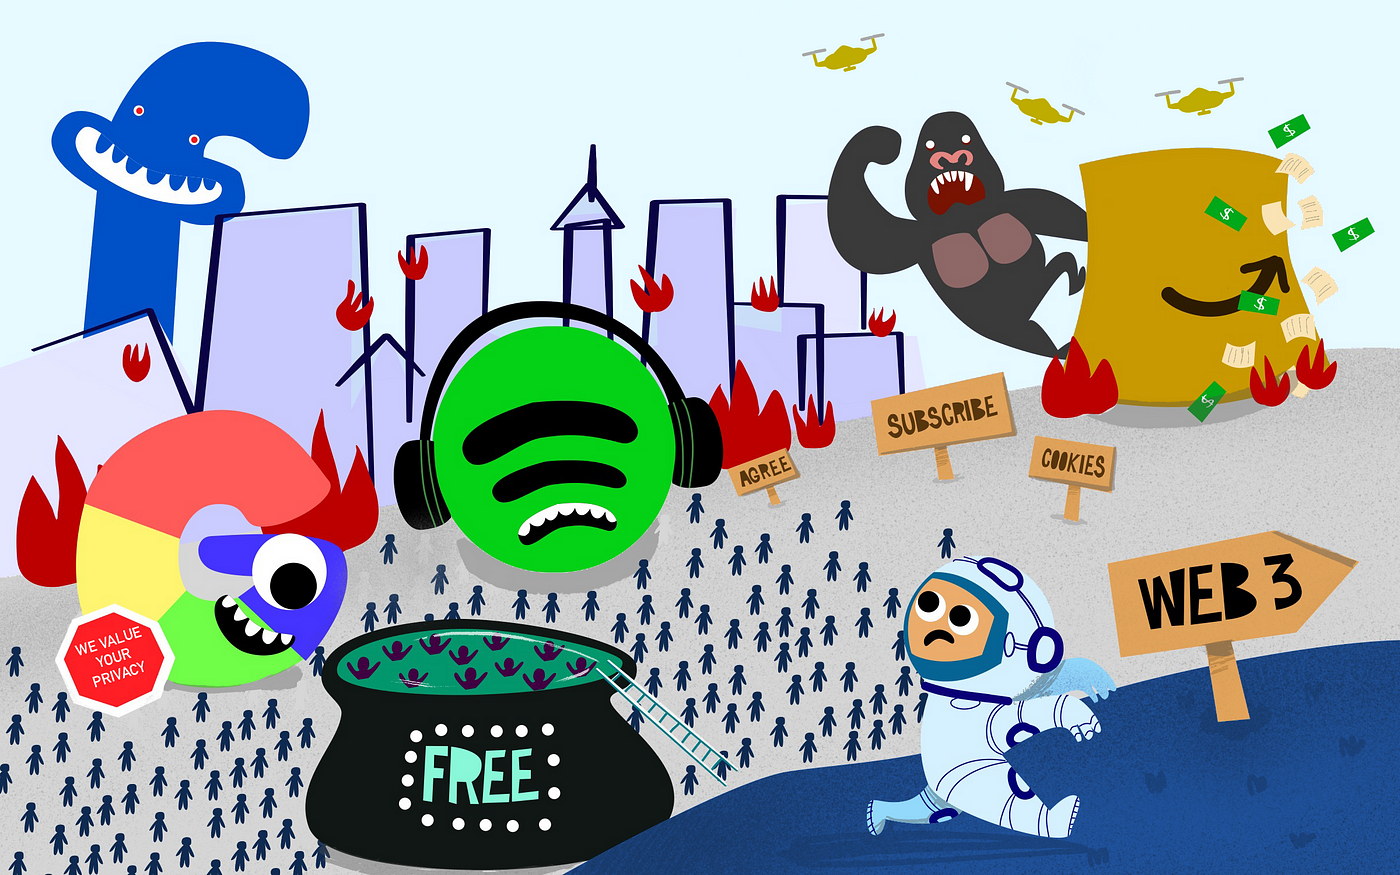 Illustration of Web2 monster companies: Amazon, Google, Facebook and Spotify in a city scape that's on fire. Towards the bottom right, an astronaut is running away towards a sign with Web3 written on it